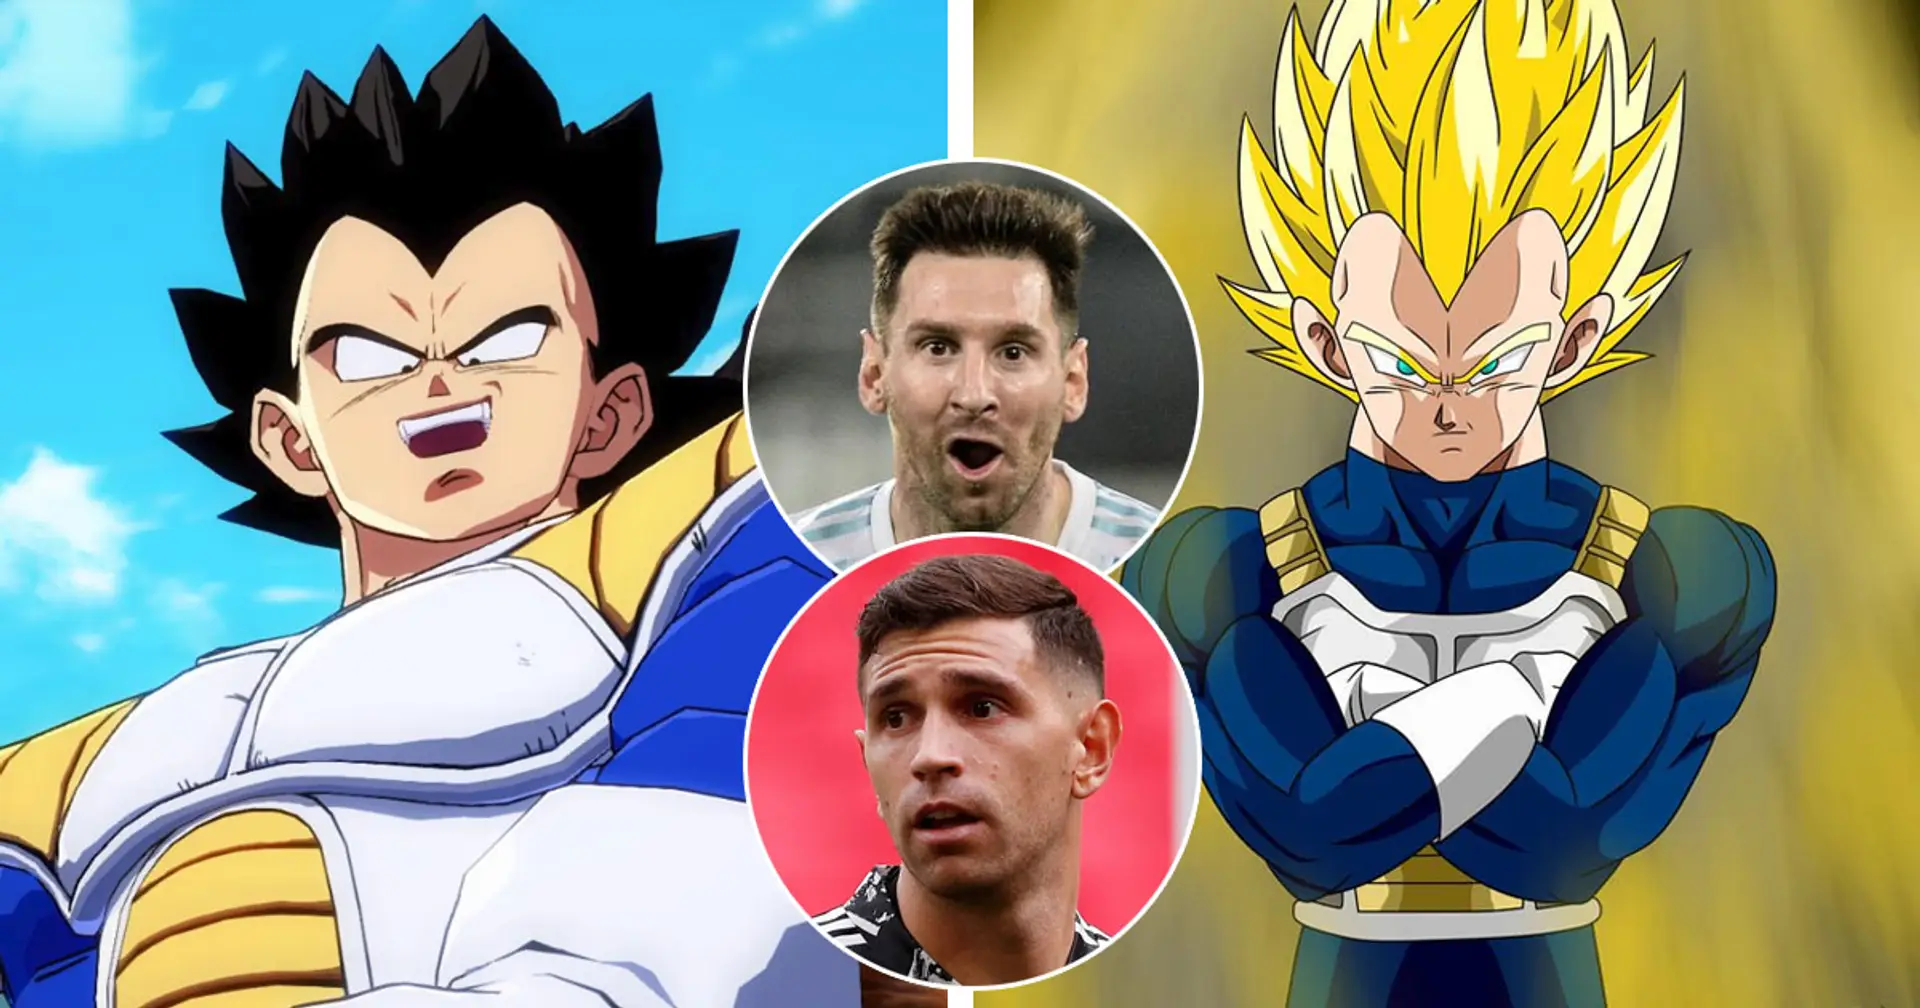 Emi Martinez uses perfect Dragon Ball analogy to describe his game with and without Messi